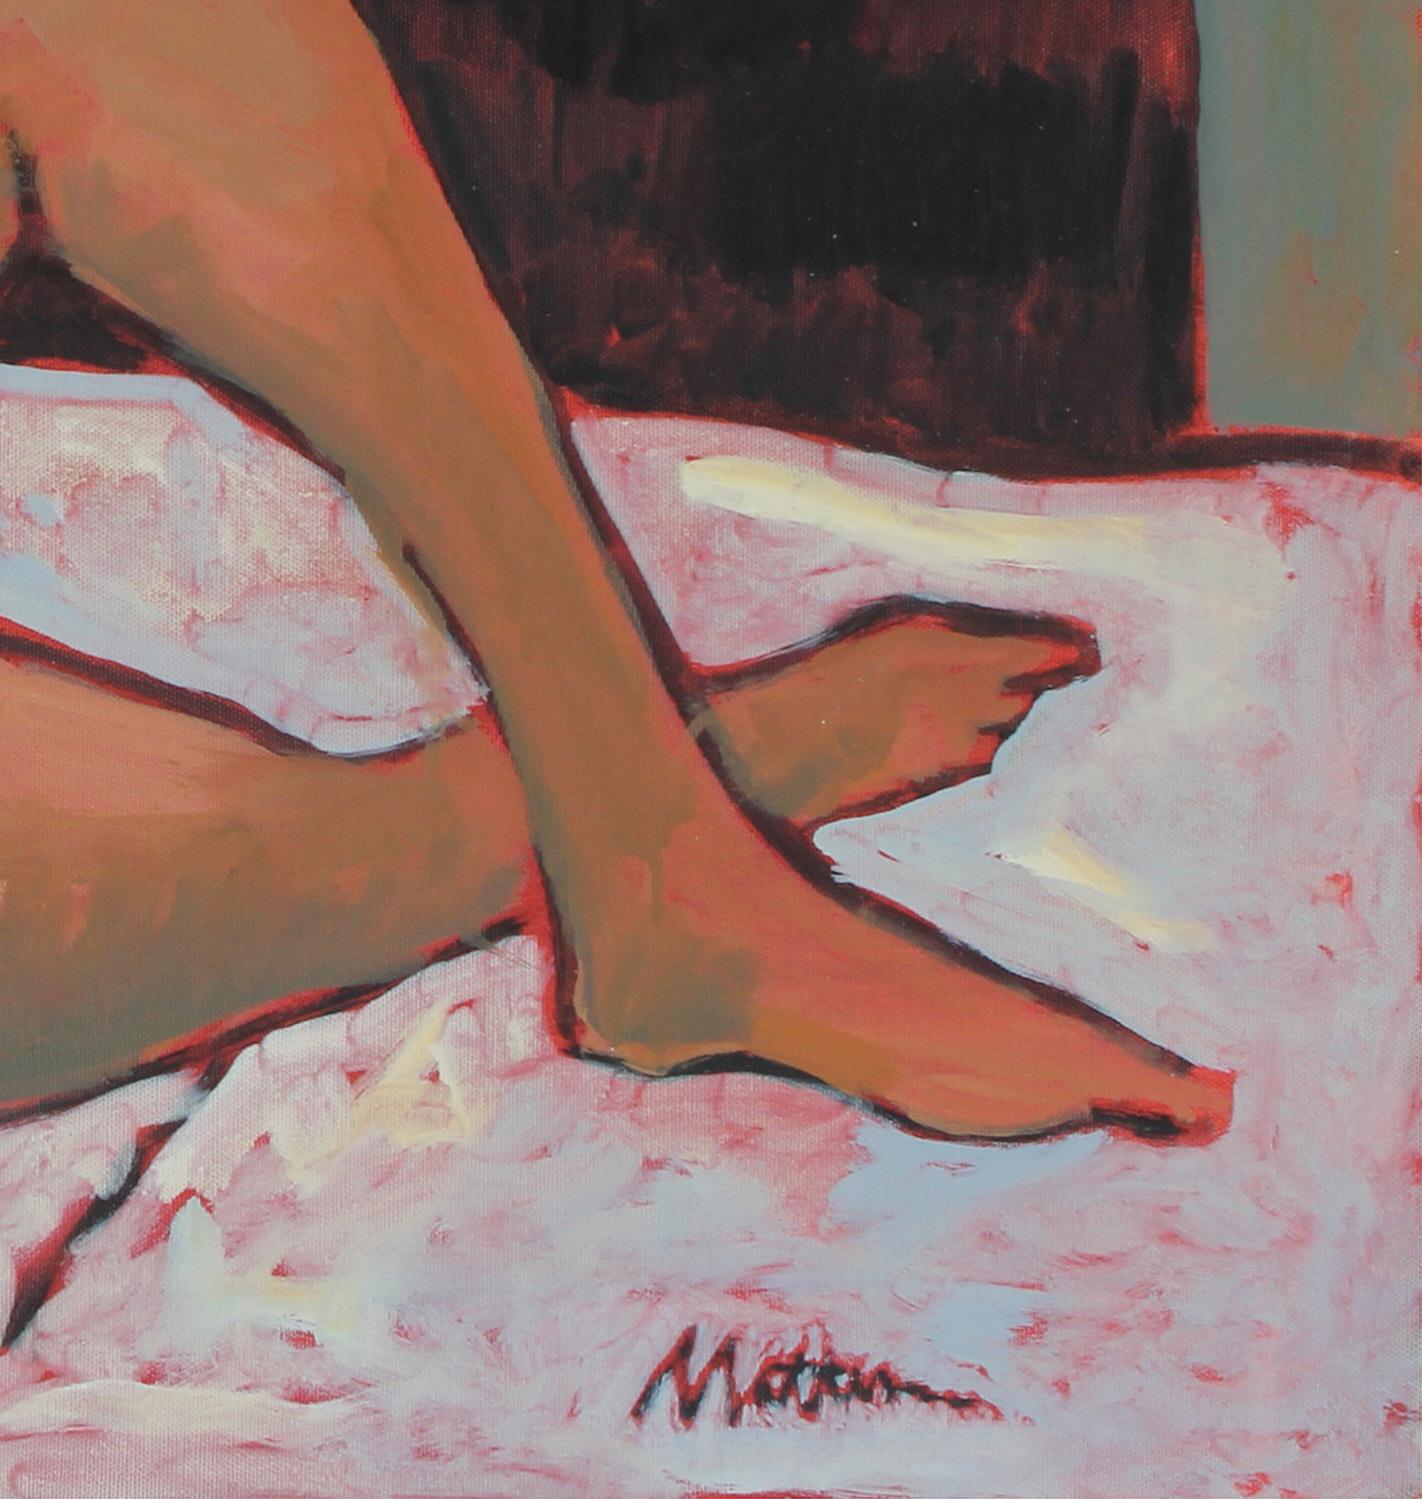 Female Figure in Bed, Oil on Canvas Painting, Late 20th Century - Brown Nude Painting by Rip Matteson